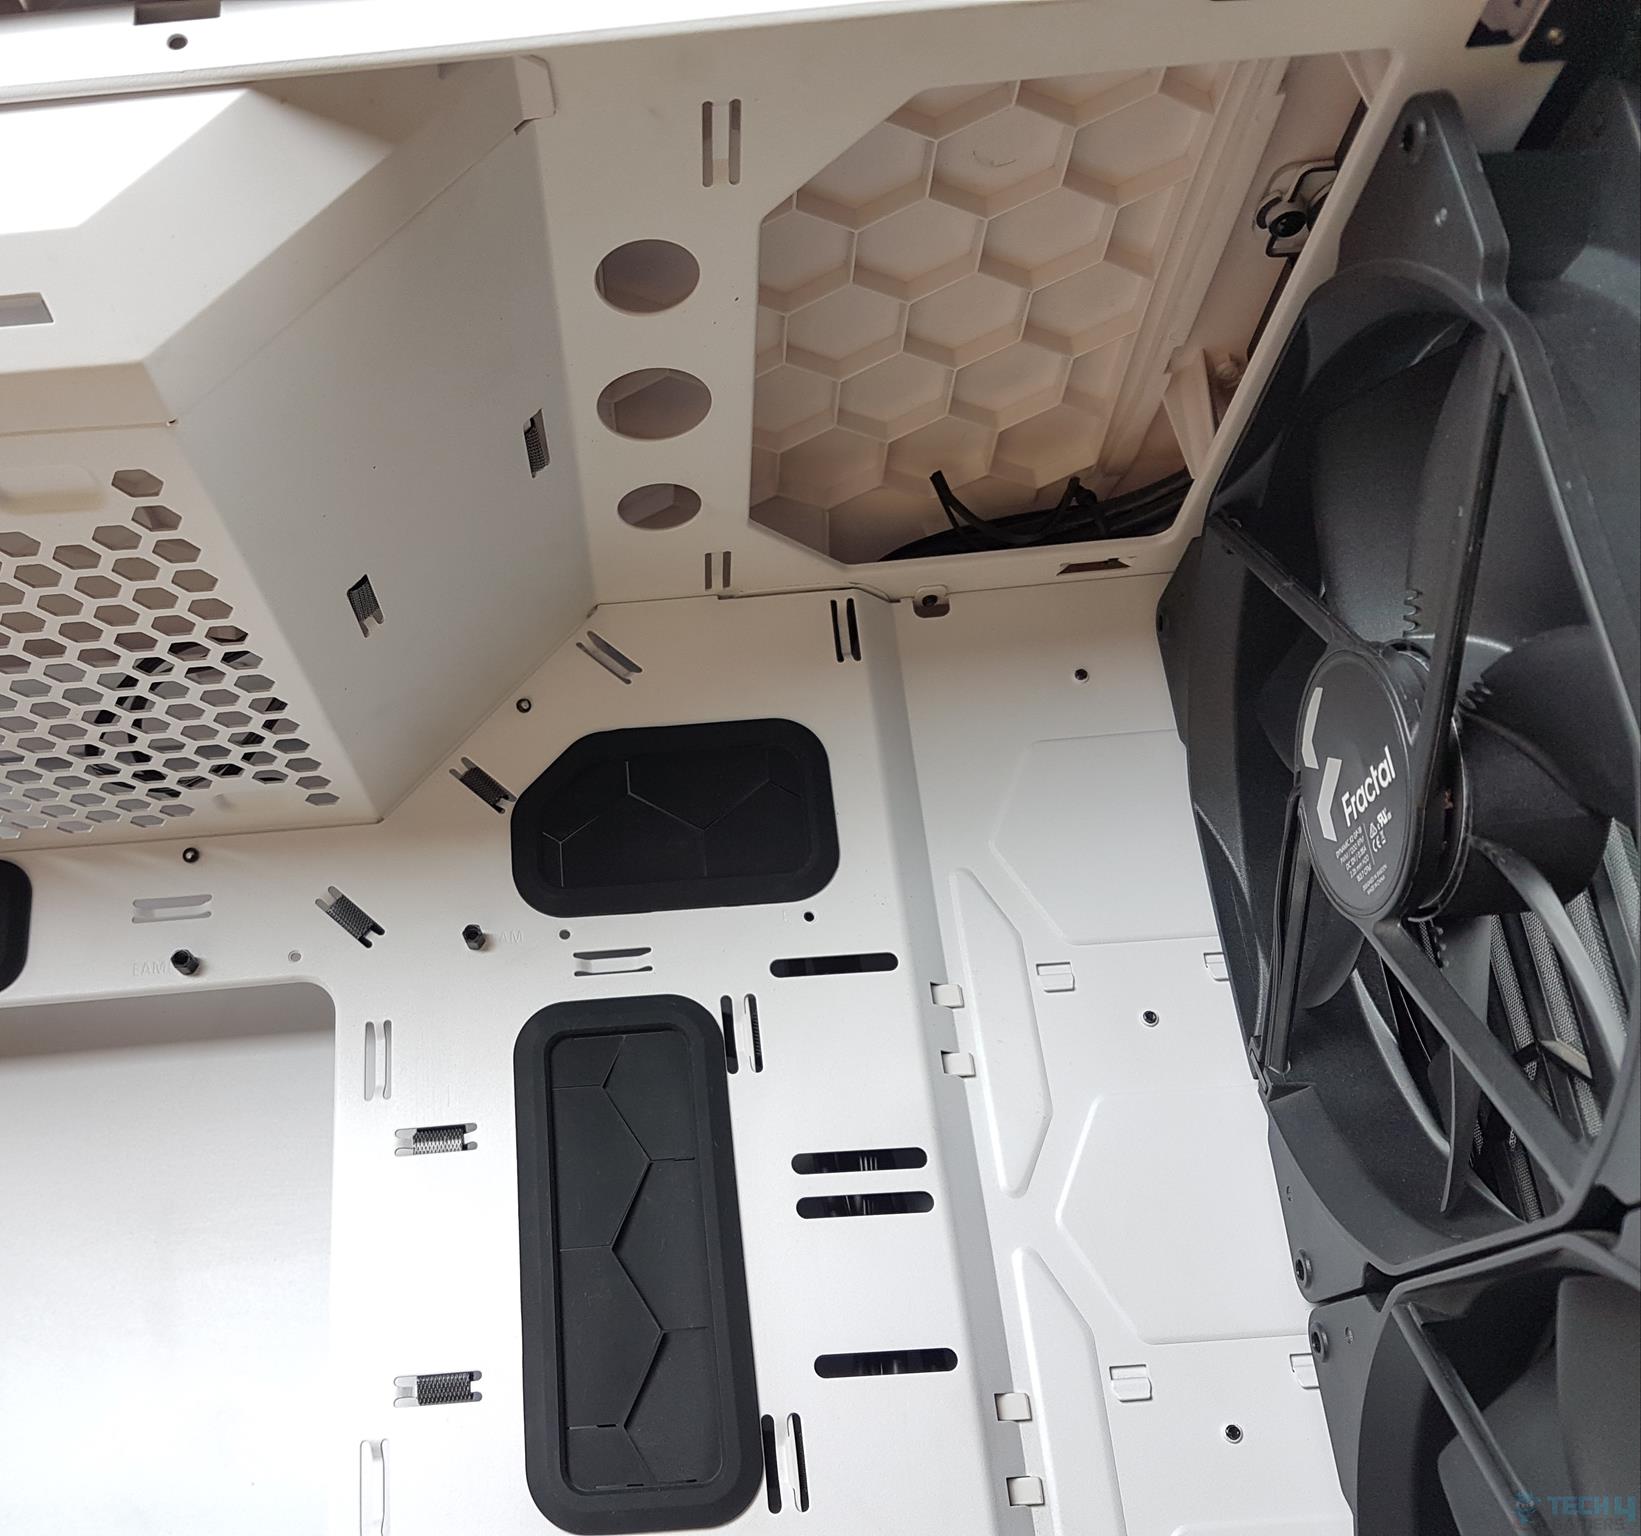 Fractal Design Torrent White TG Clear Tint PC Case — The top of the case from inside